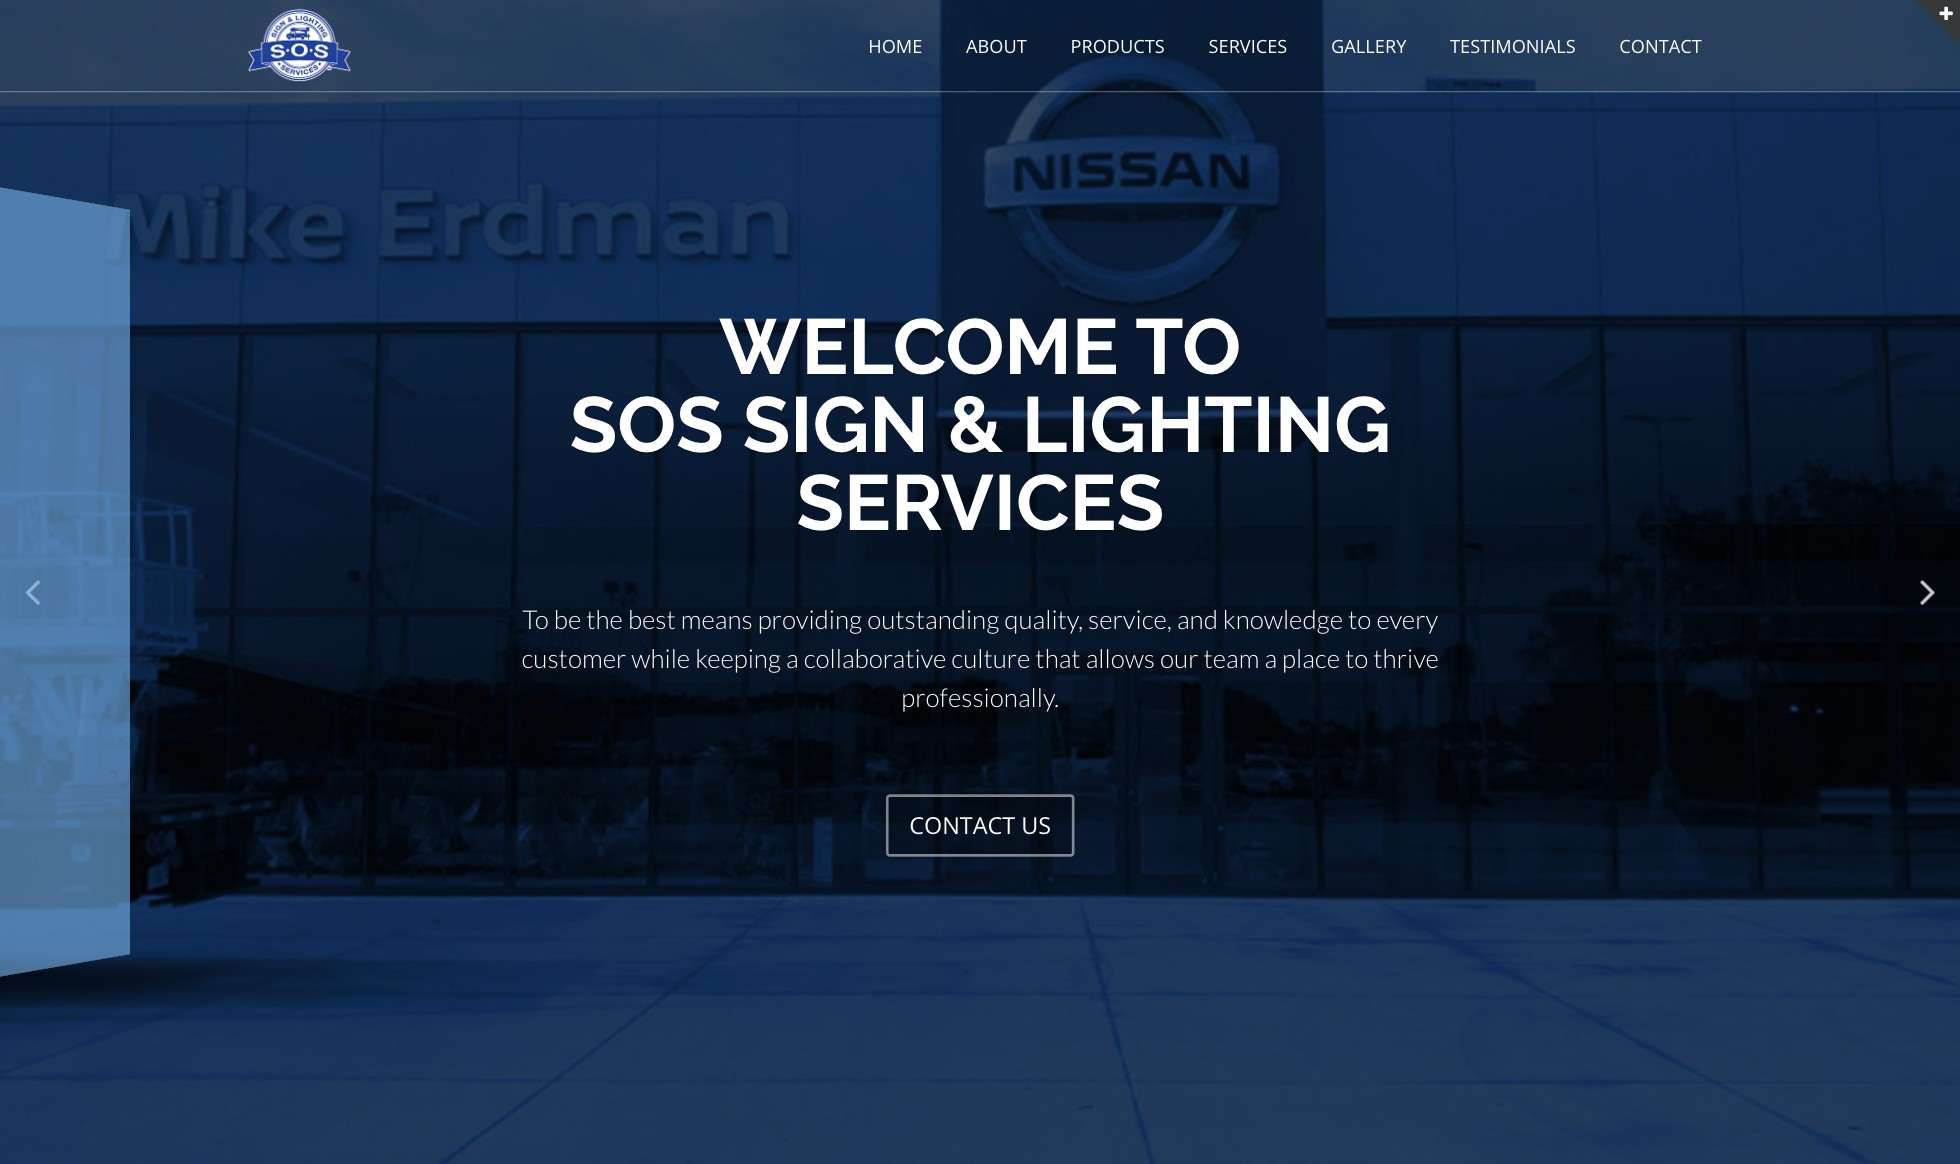 SOS Sign & Lighting Services